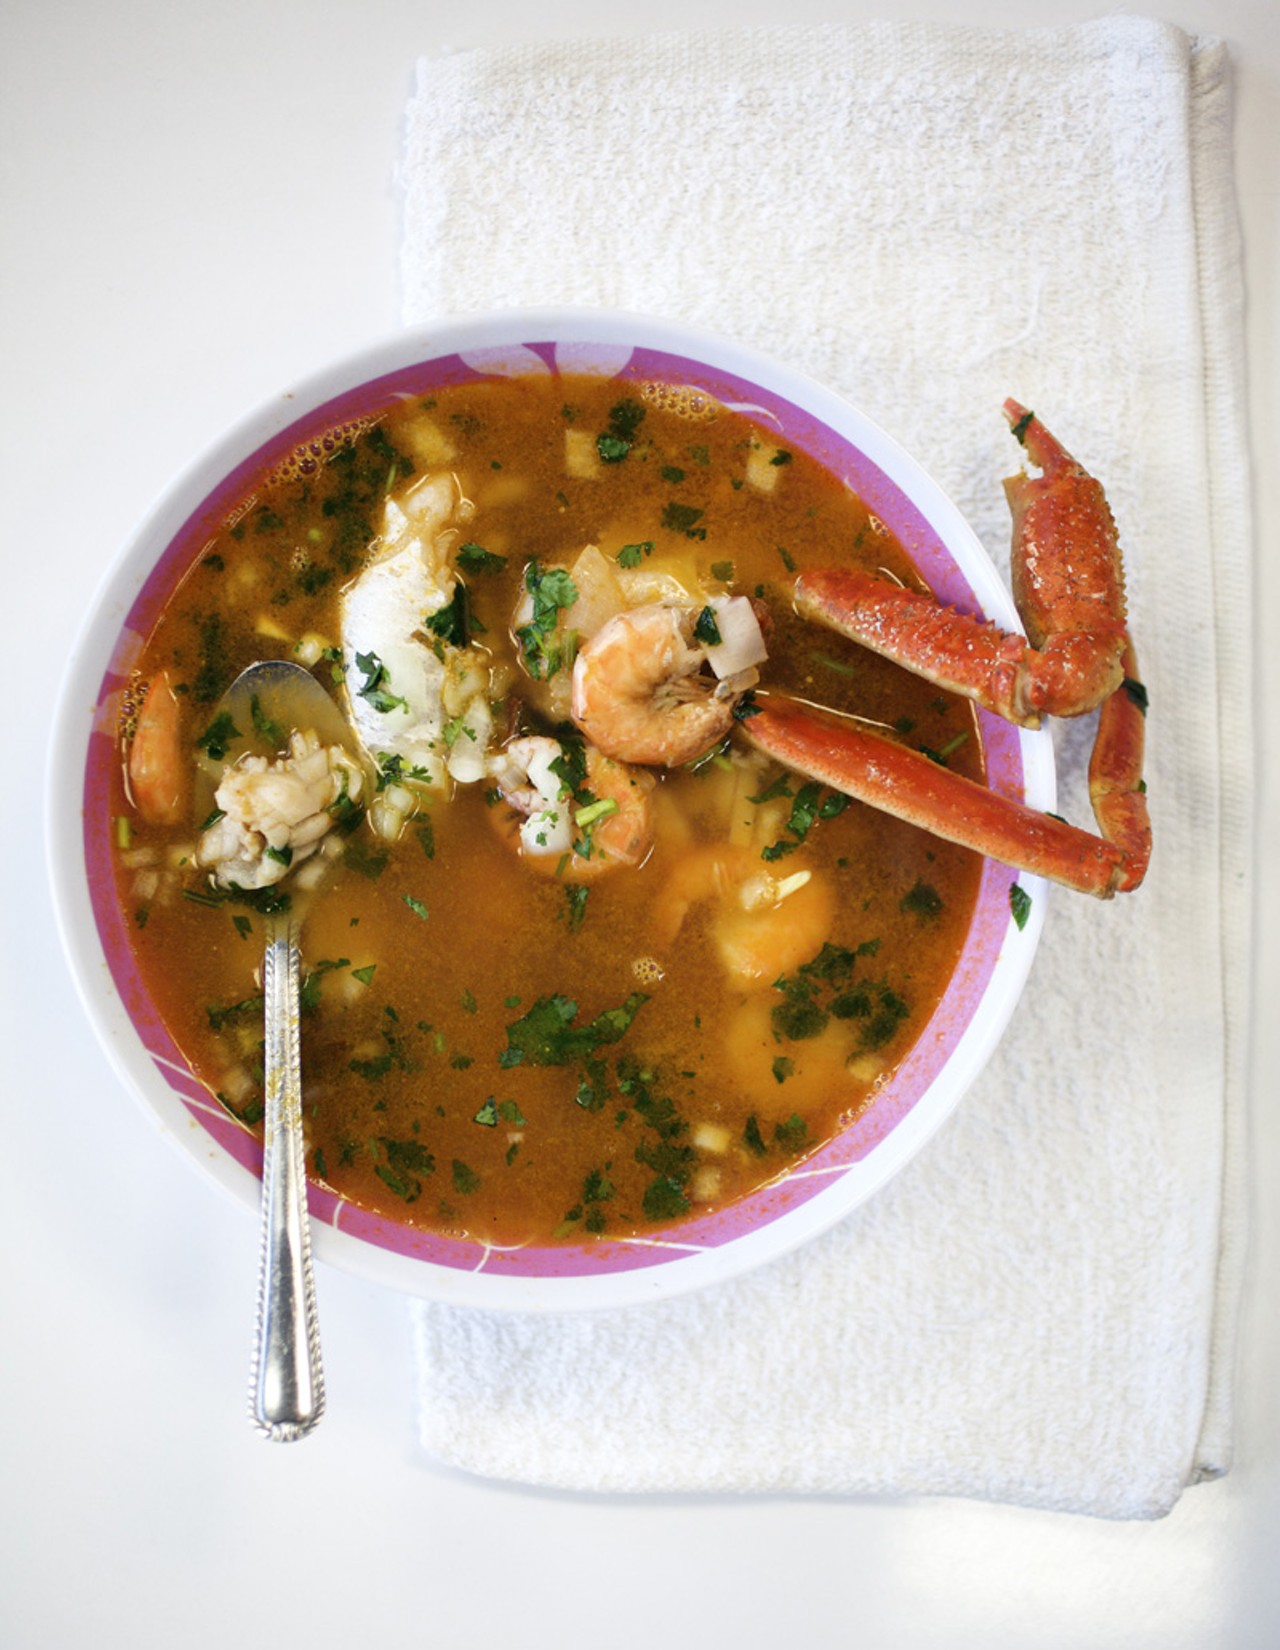 Caldo de Mariscos is a seafood soup that is prepared with shrimp, catfish and crab in a tomato based broth.